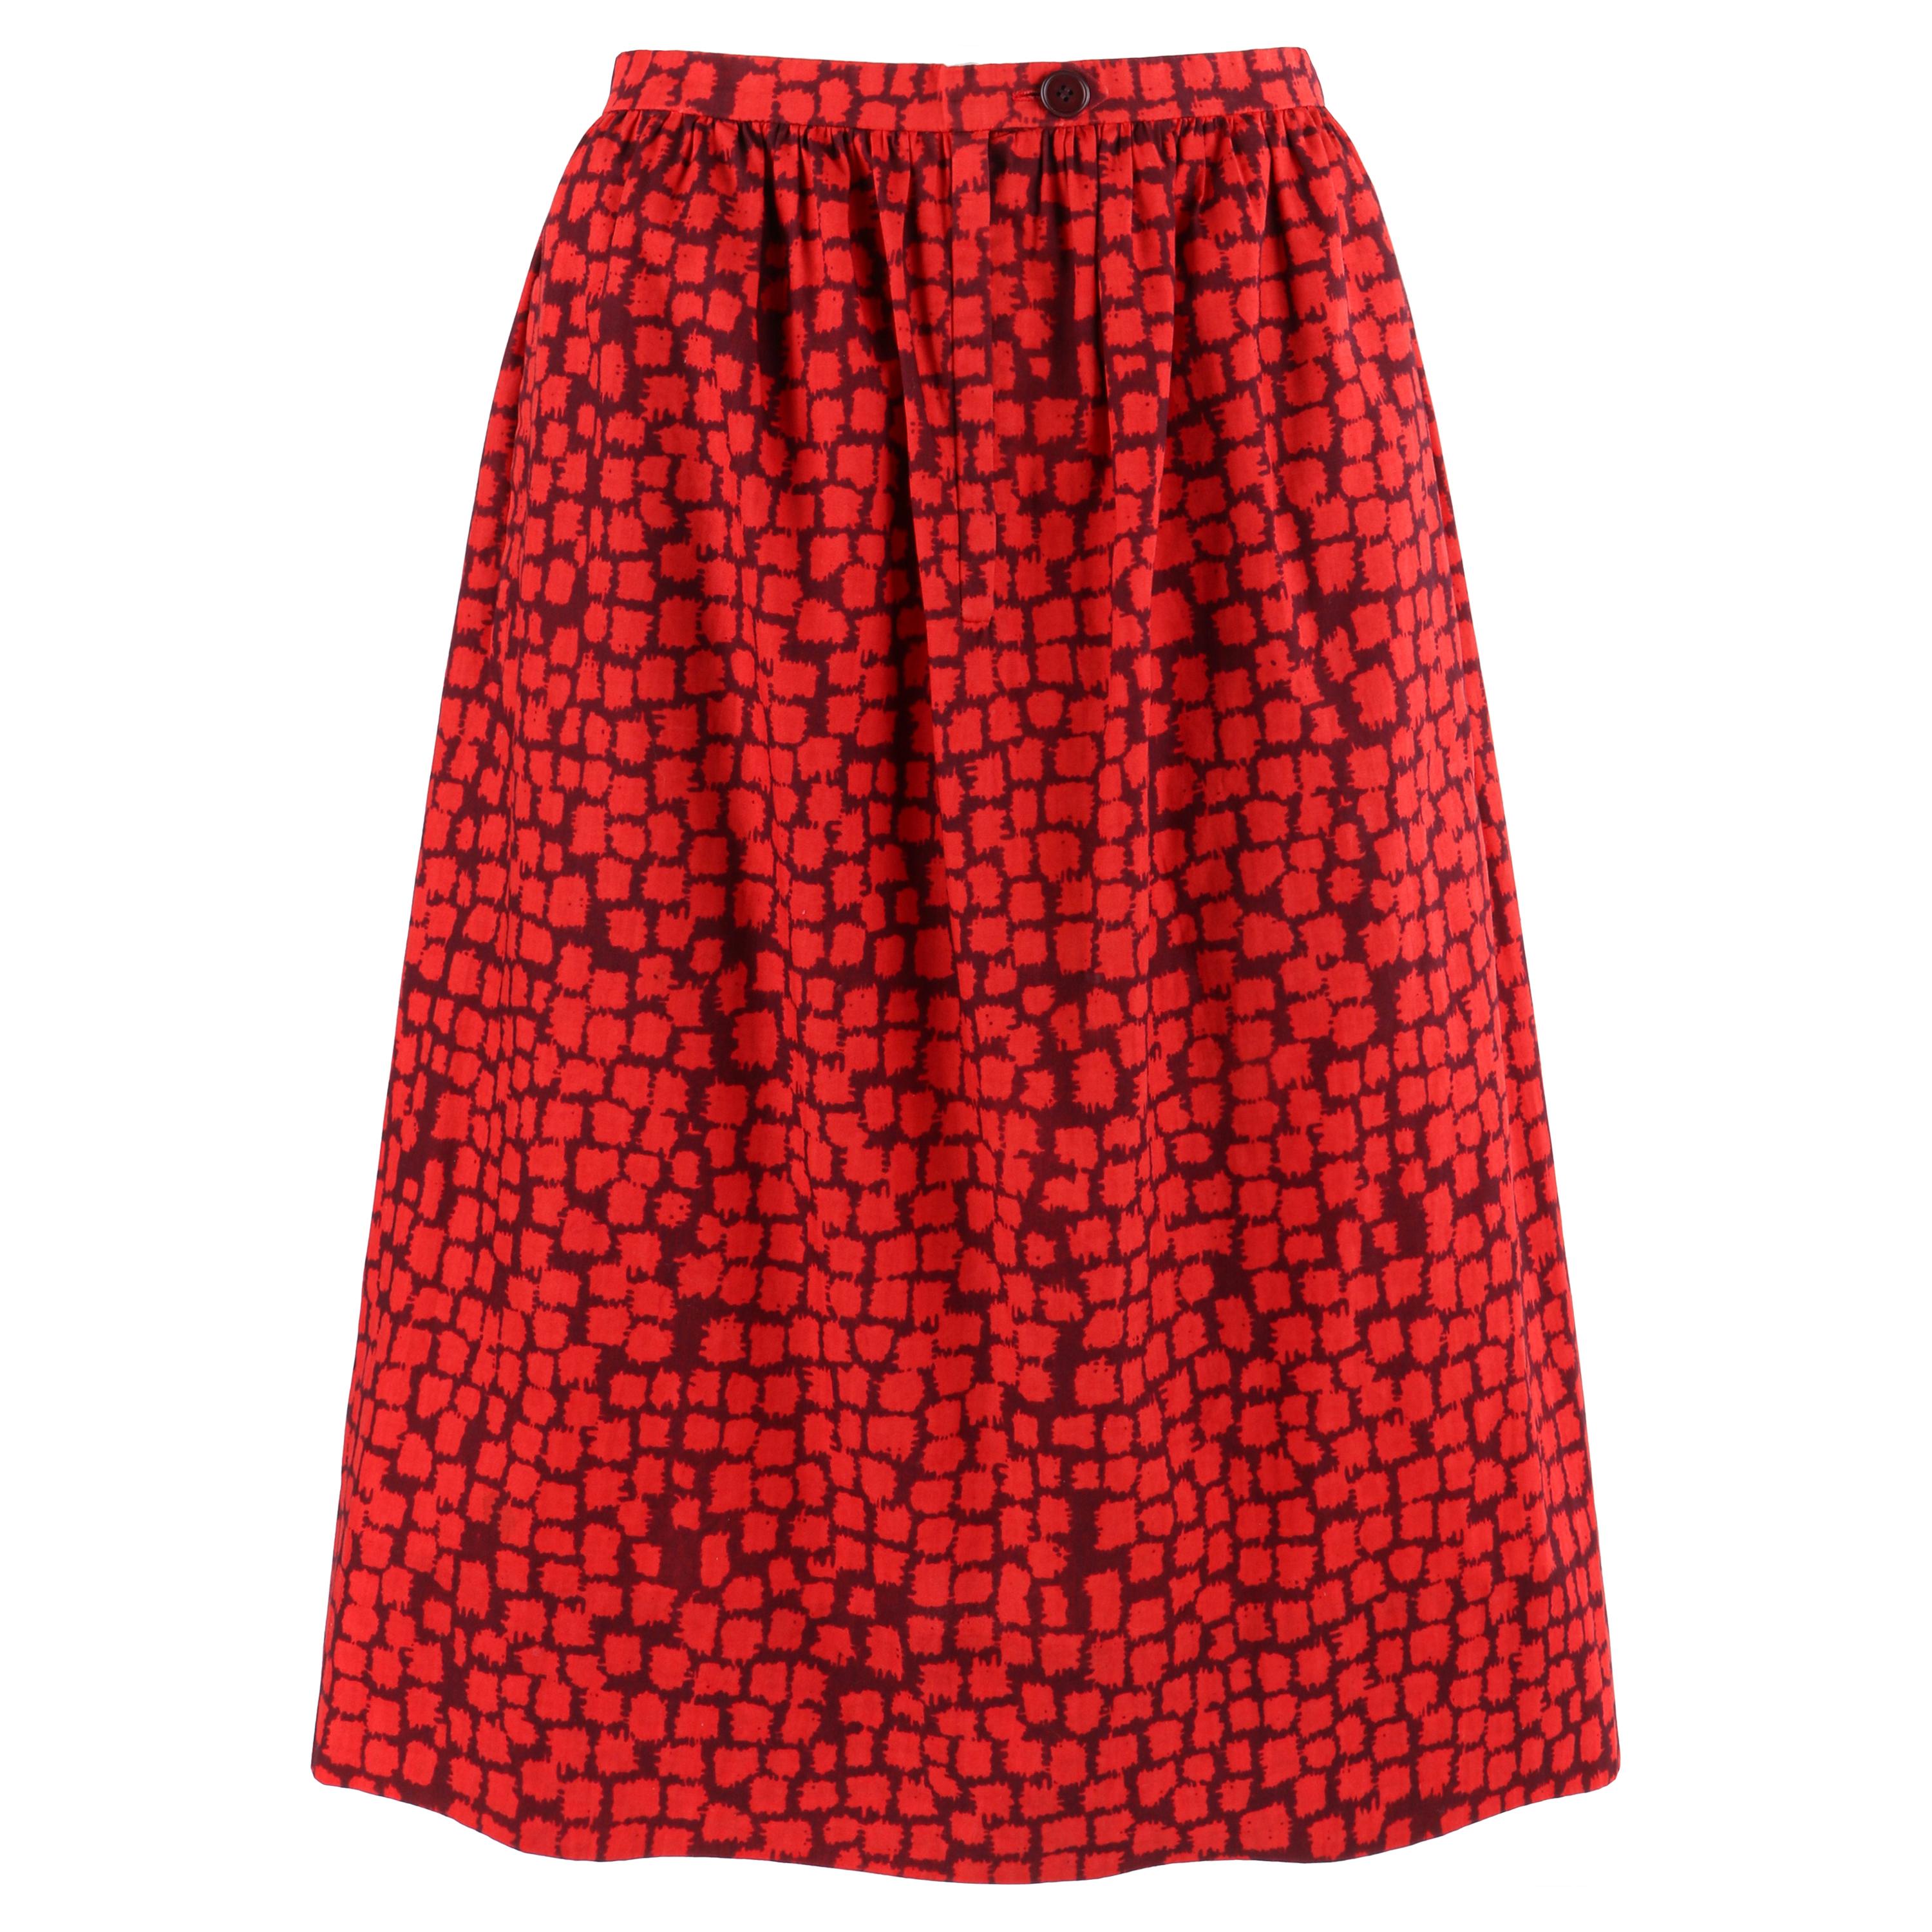 GIVENCHY c.1970’s Couture Numbered Red Geometric Gathered Tea Length Skirt